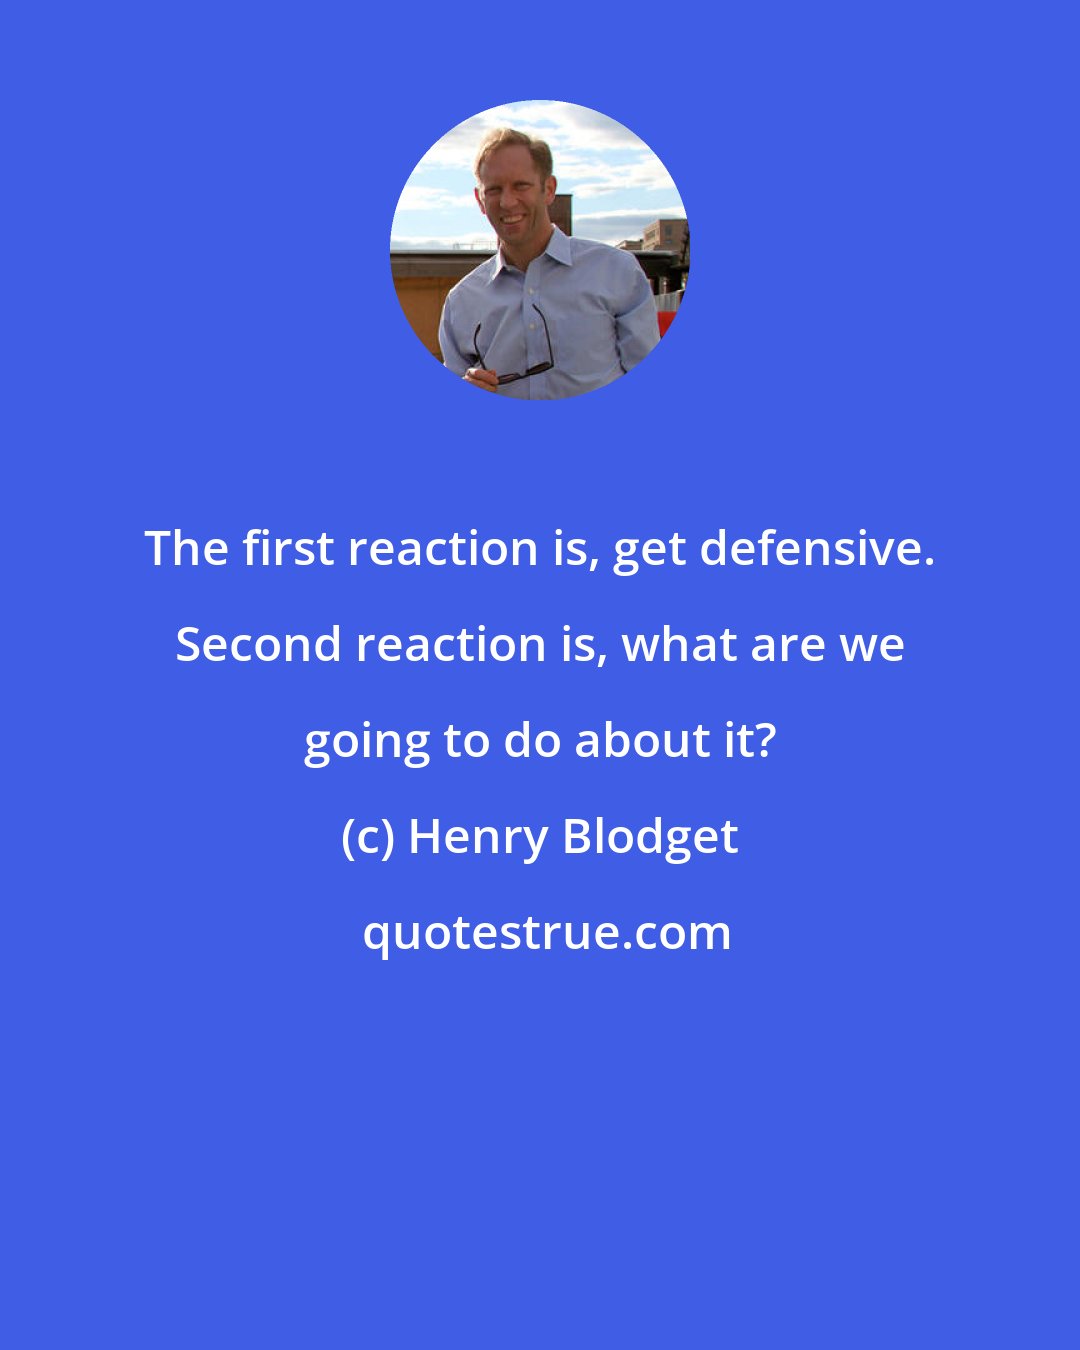 Henry Blodget: The first reaction is, get defensive. Second reaction is, what are we going to do about it?